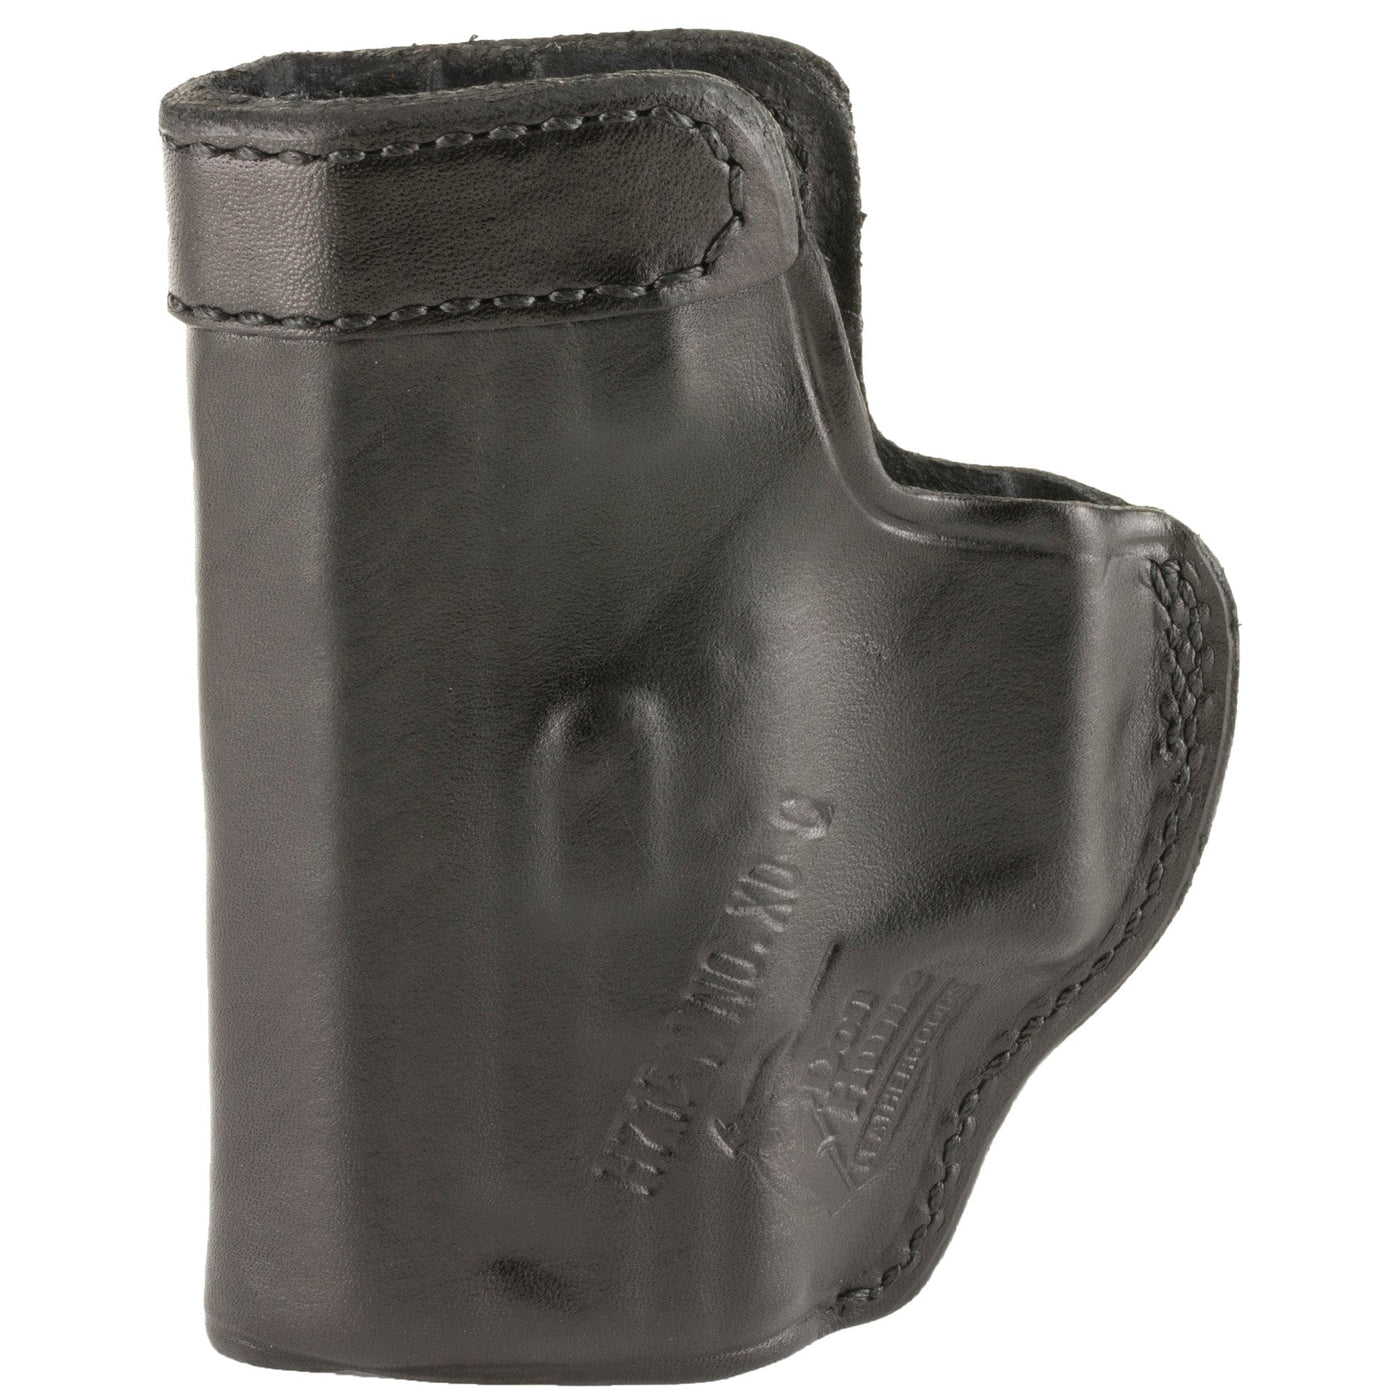 Don Hume D Hume H715-m Sp Xd-c 3" Rh Black Holsters